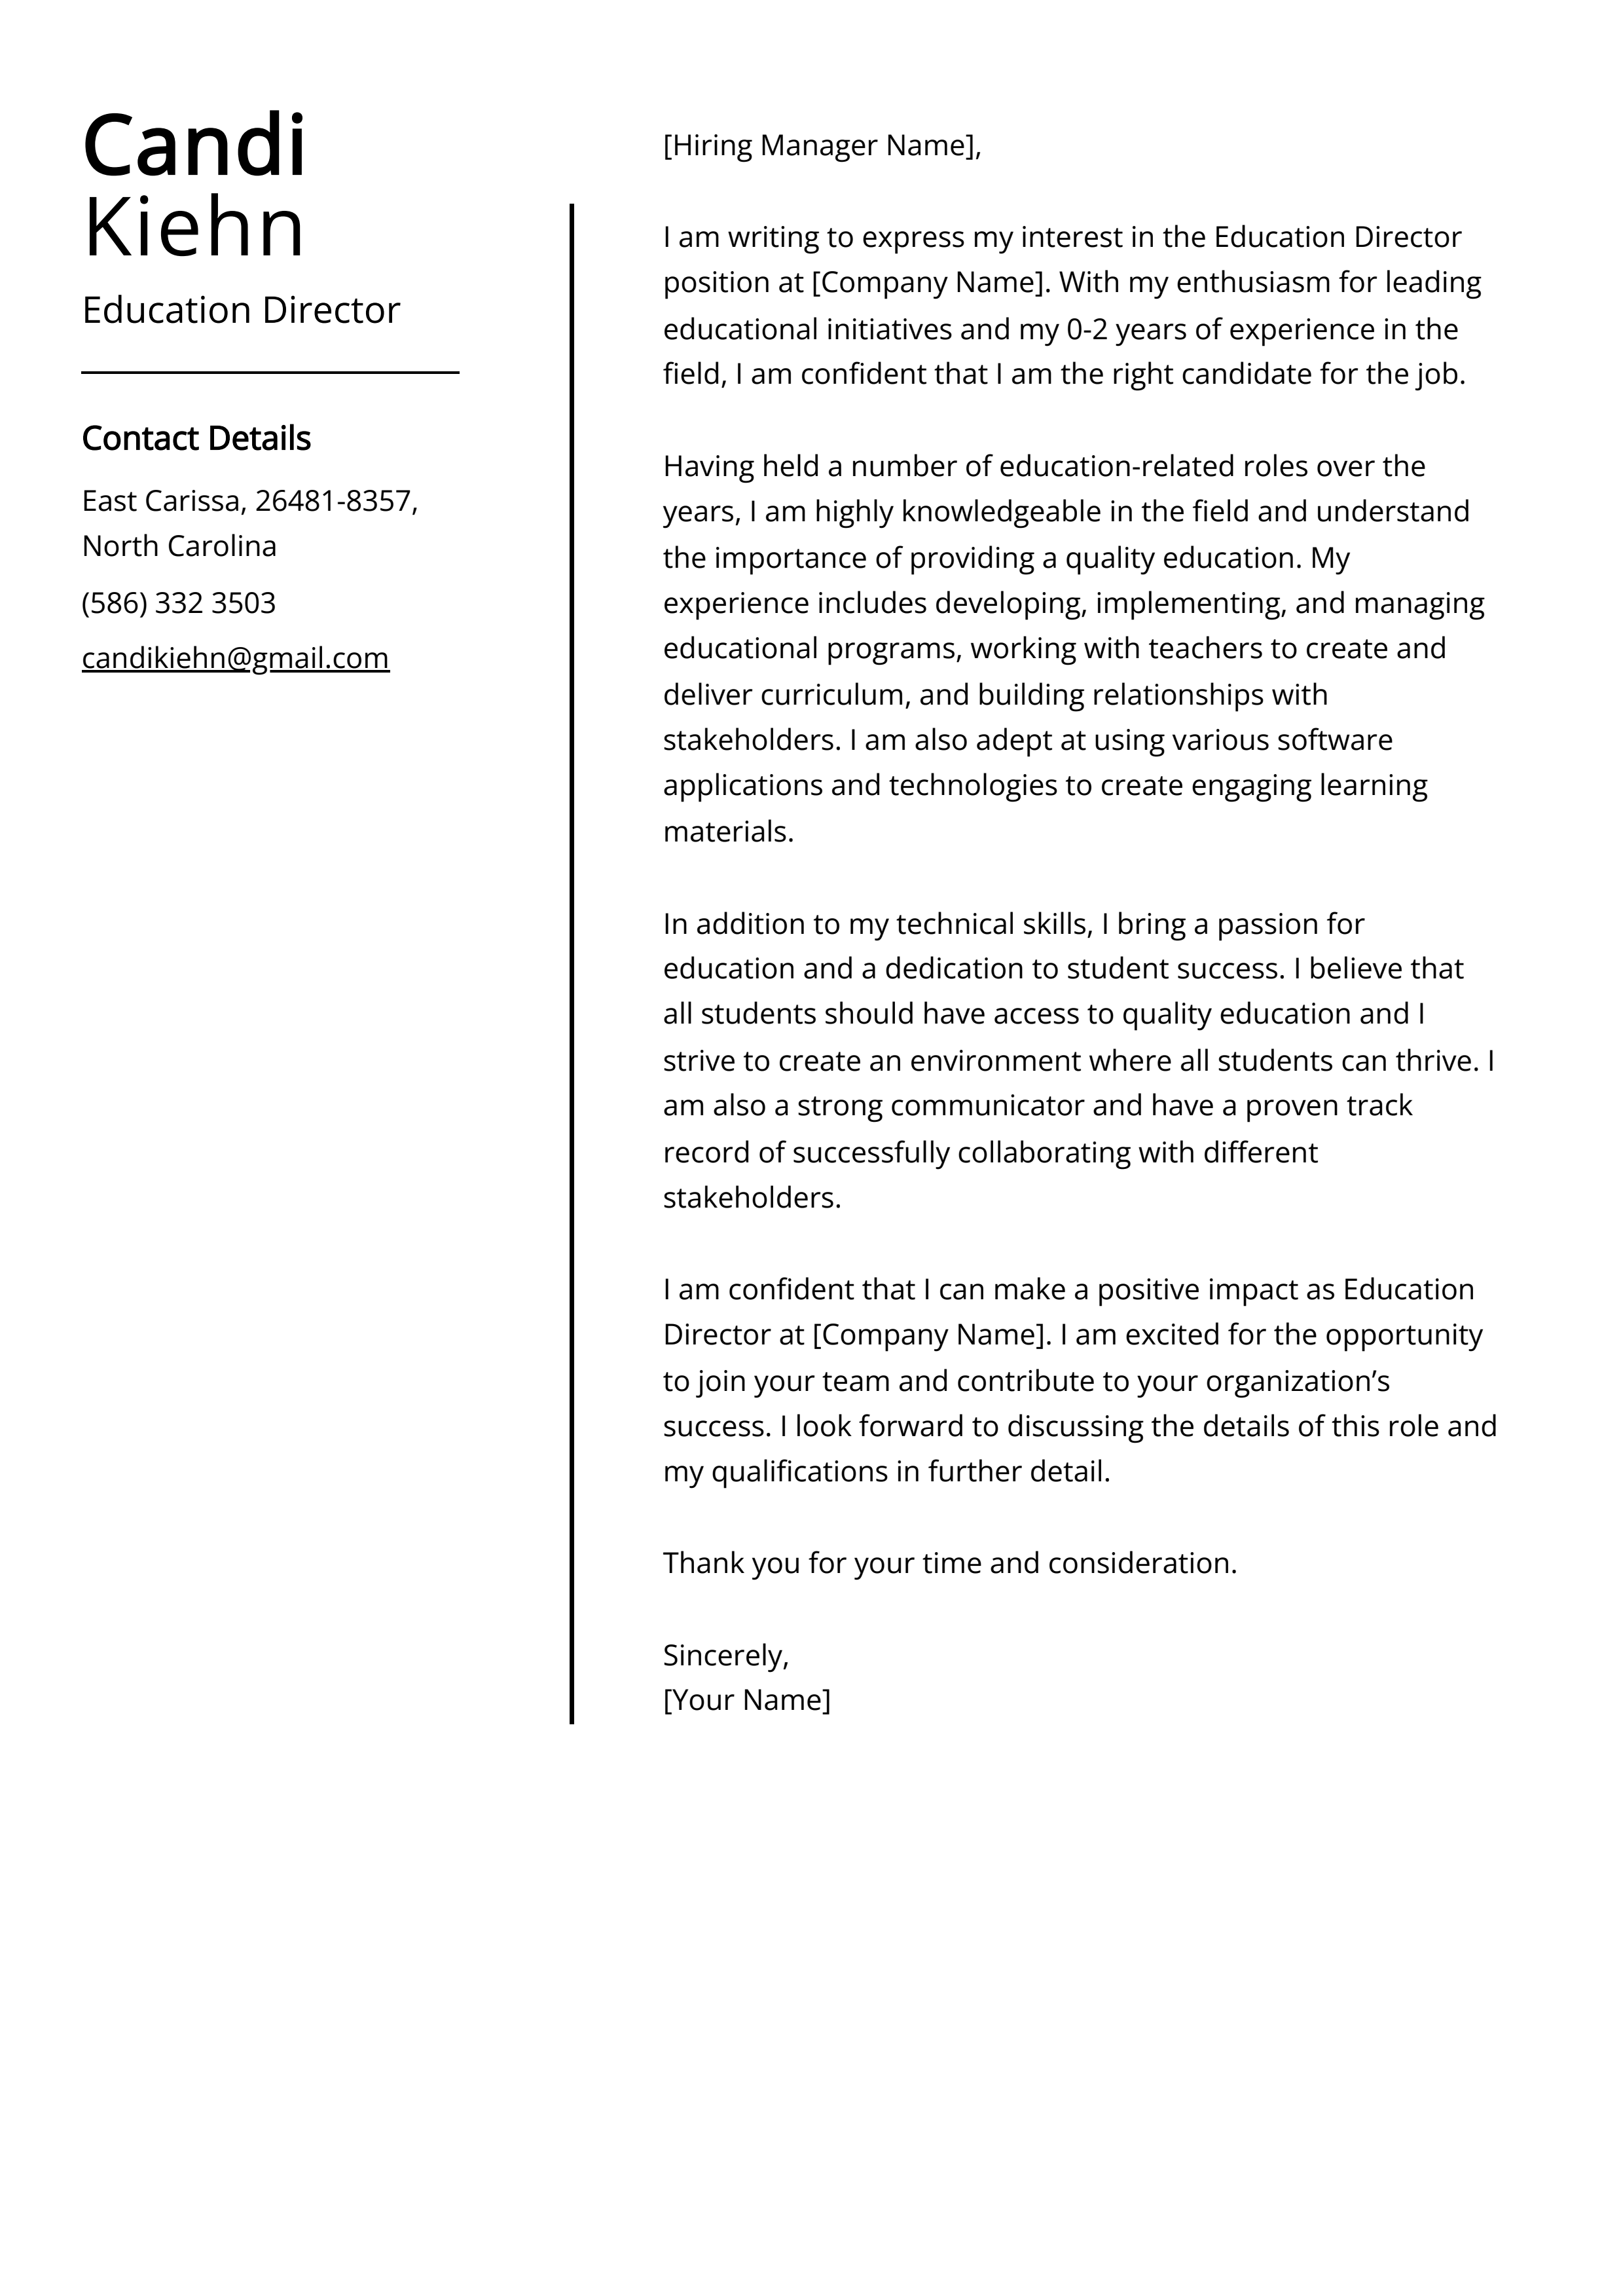 Education Director Cover Letter Example